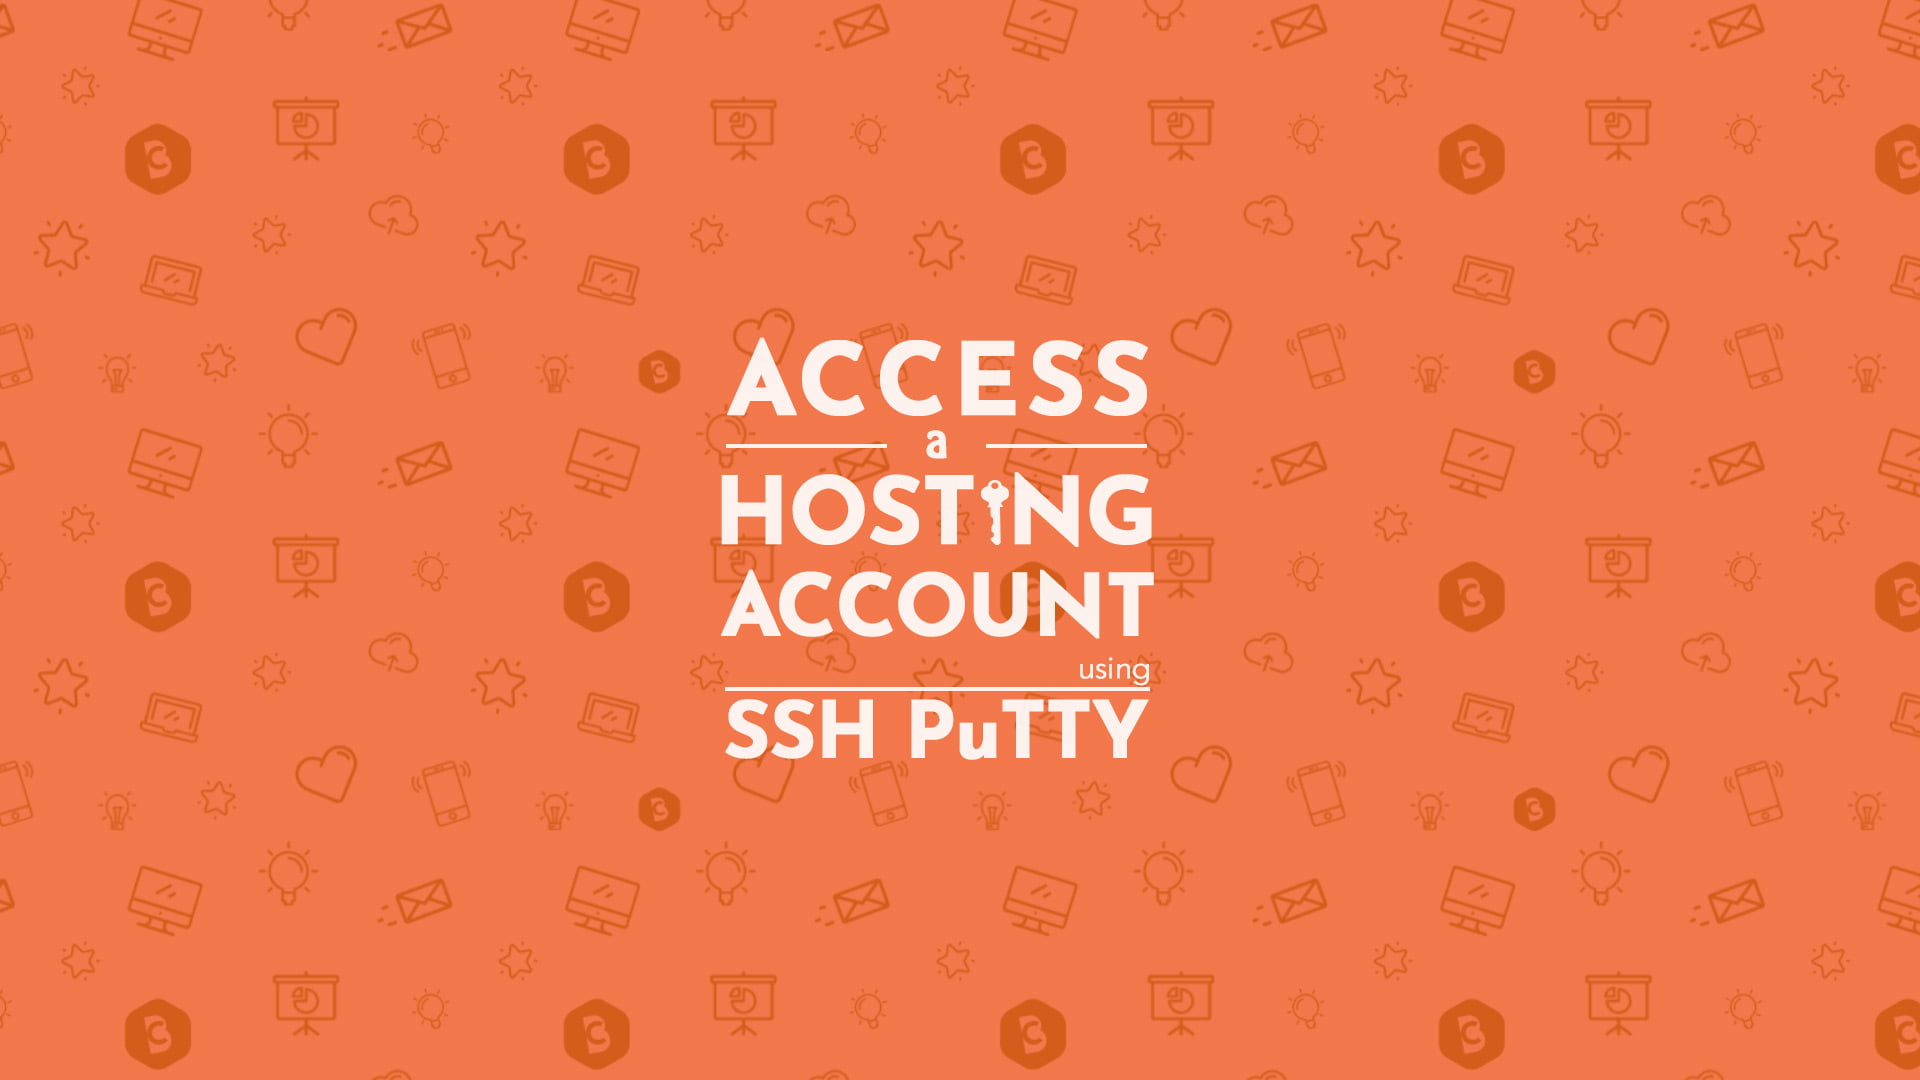 Access a Hosting Account using SSH Key with PuTTY